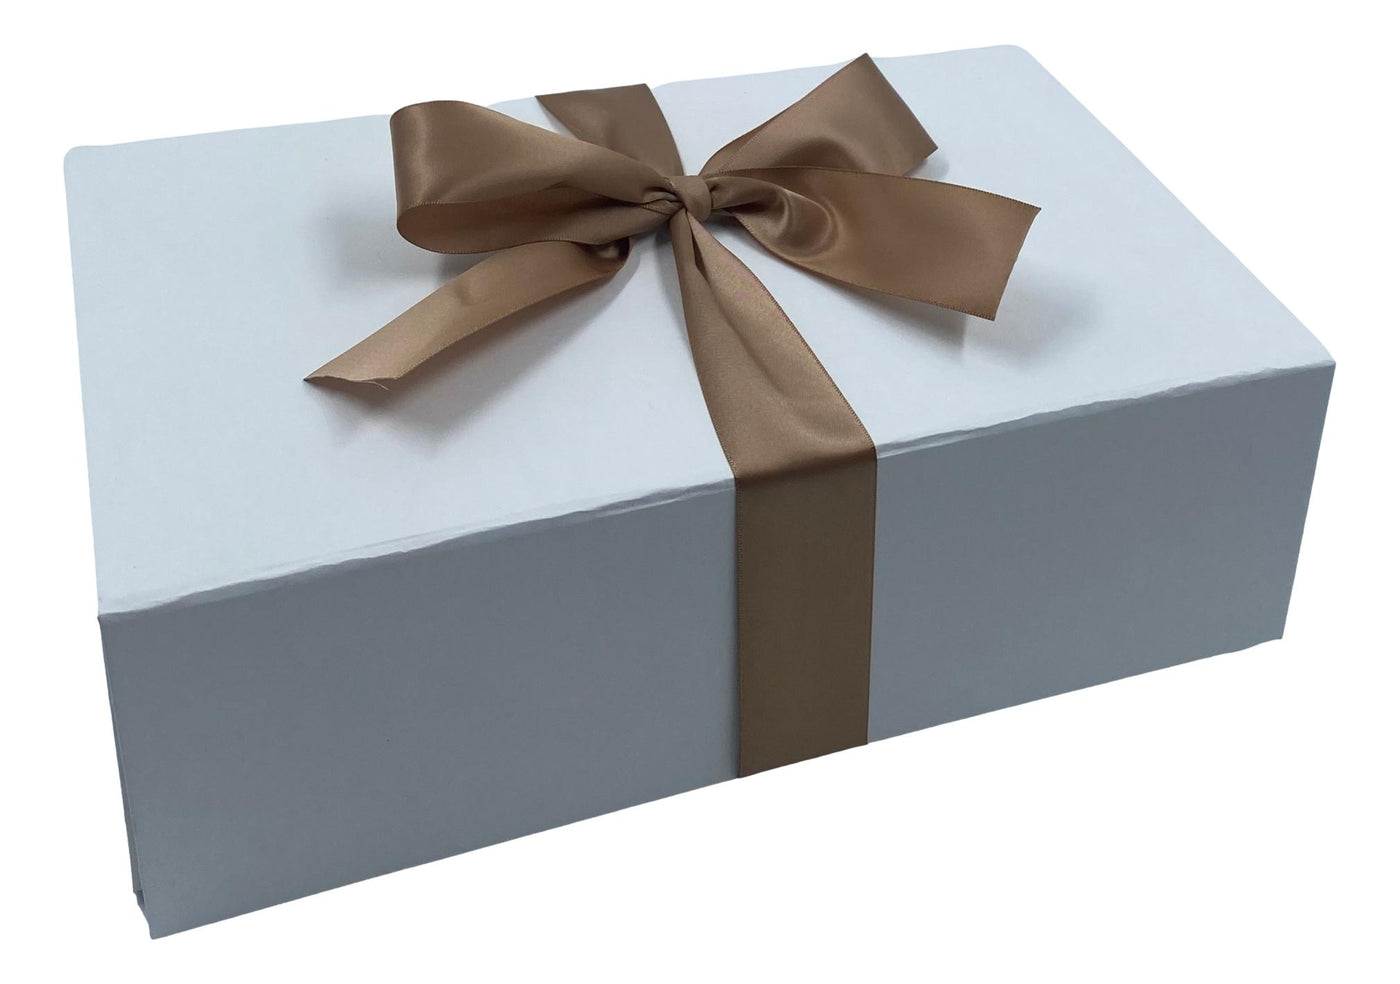 Basket Creations Gift Boxes and Gift Hampers Delivered In New Zealand